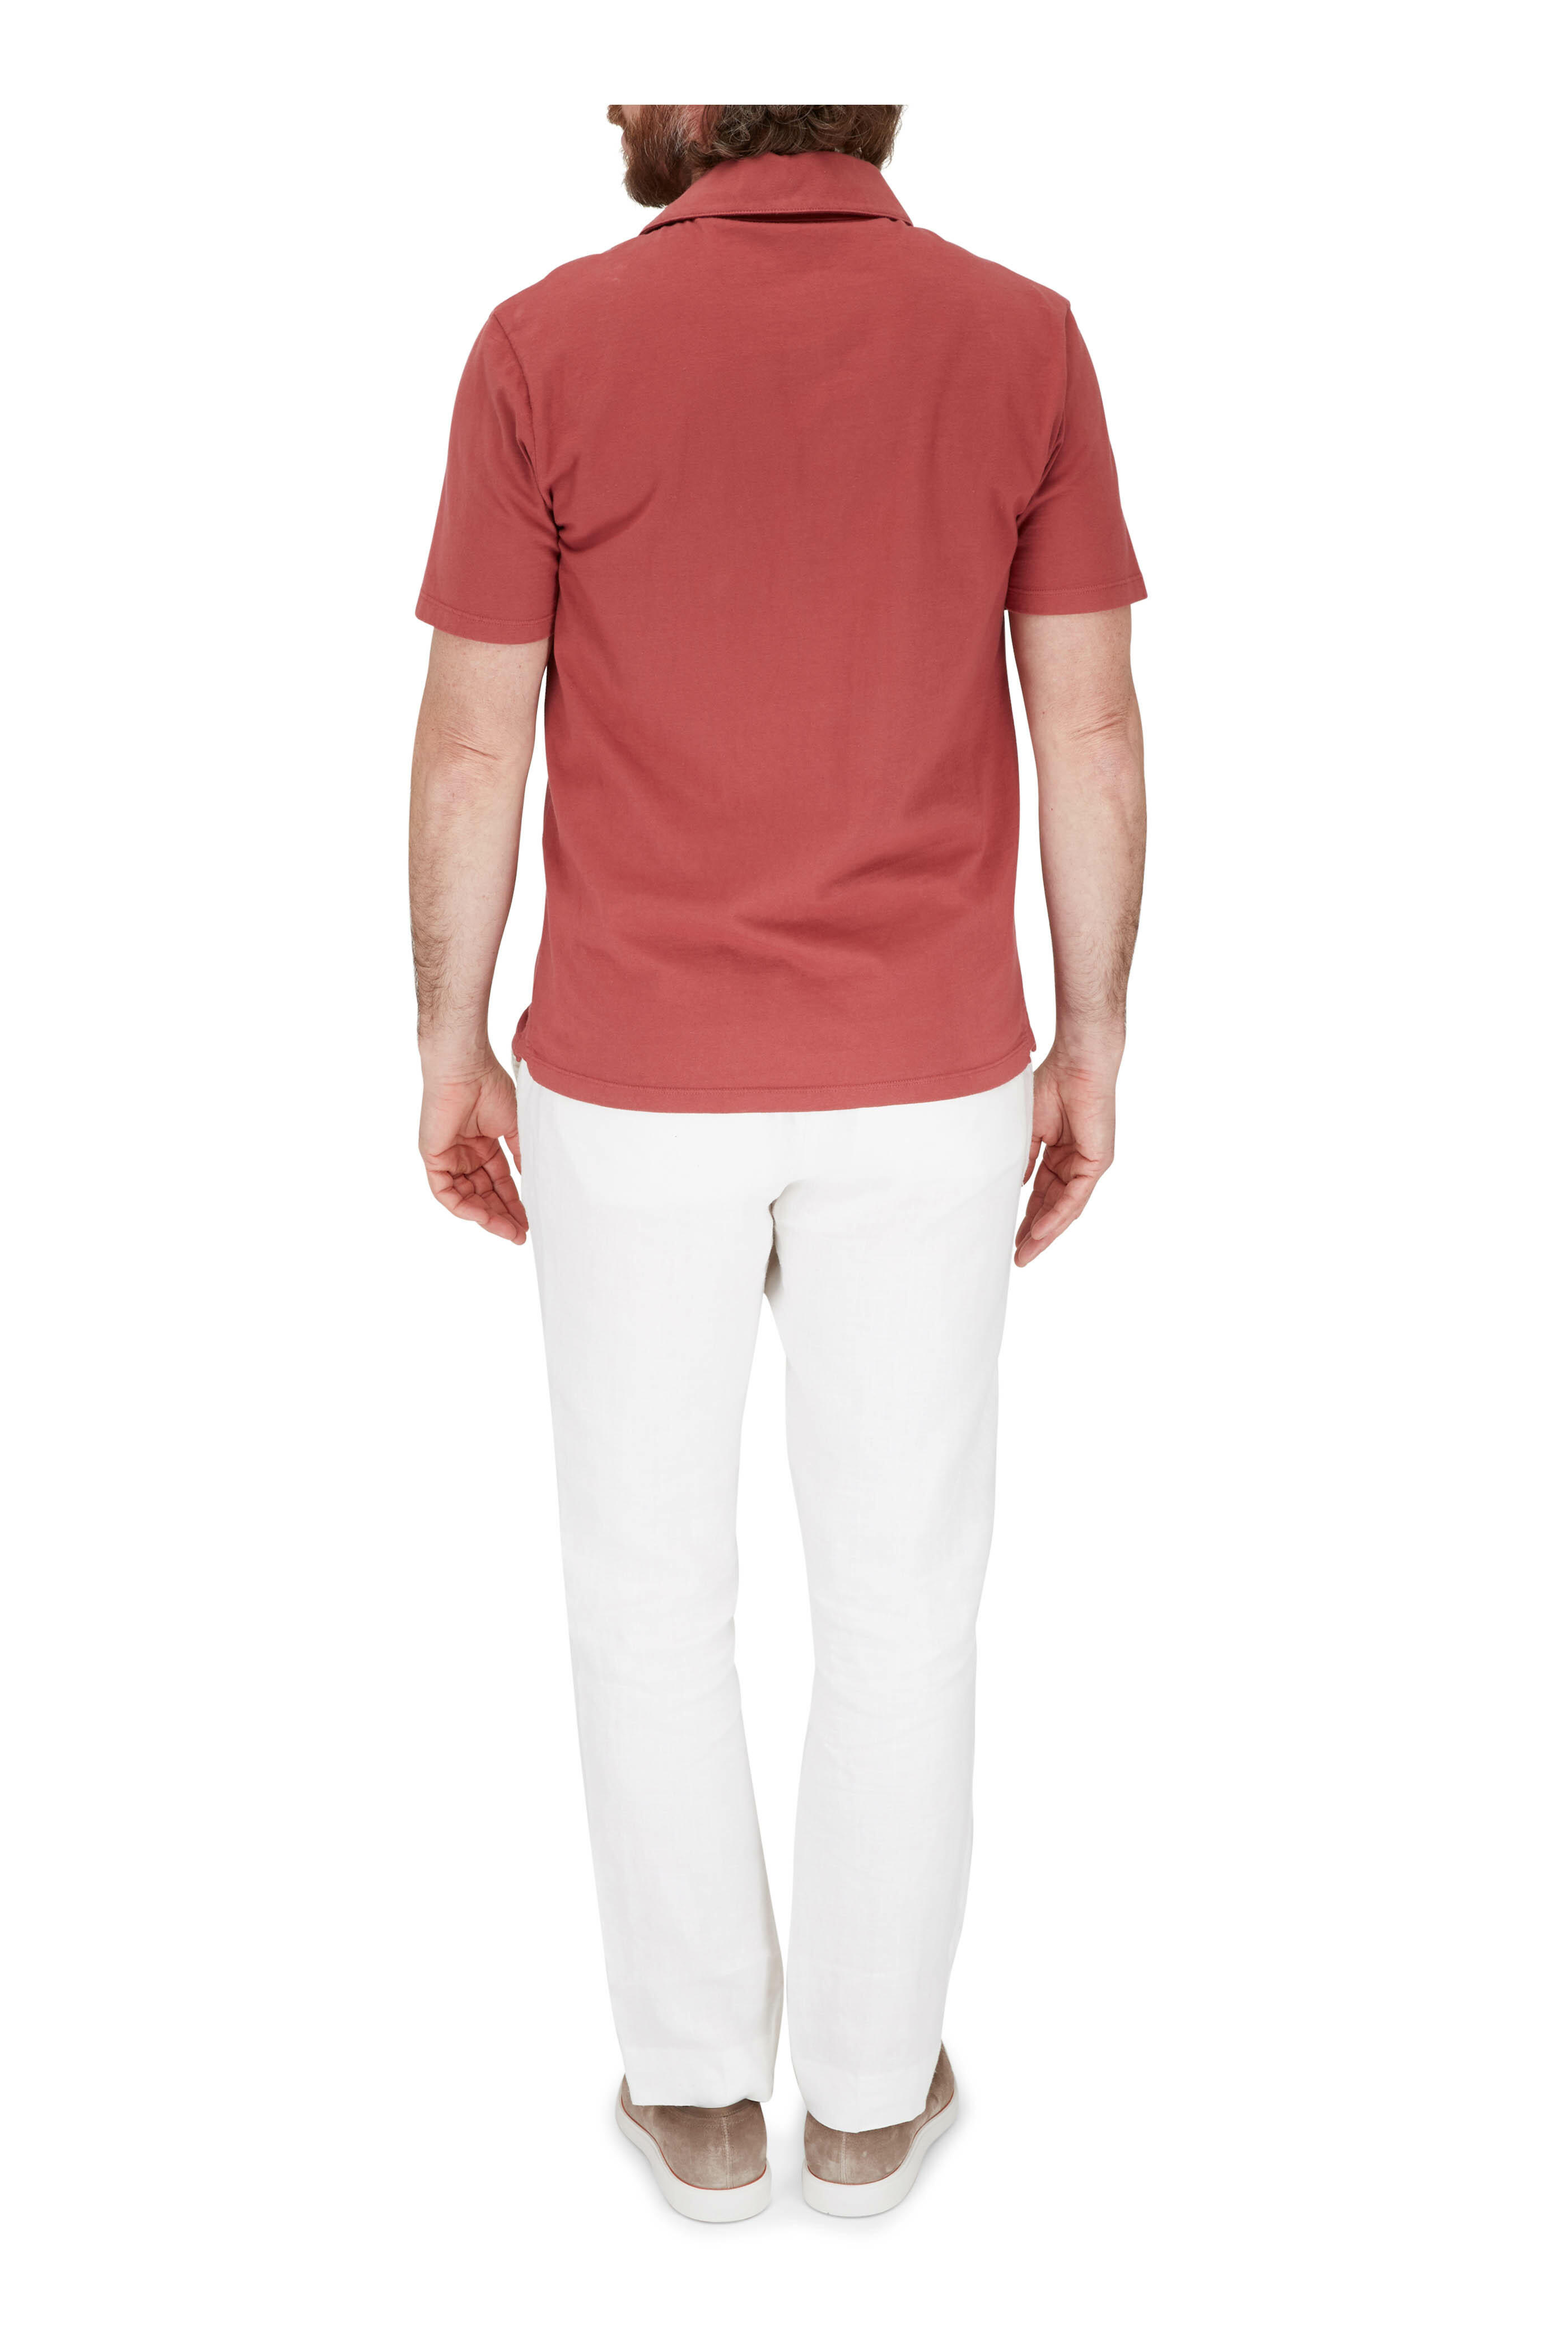 Vince - Washed Wild Barberry Garment Dye Short Sleeve Polo